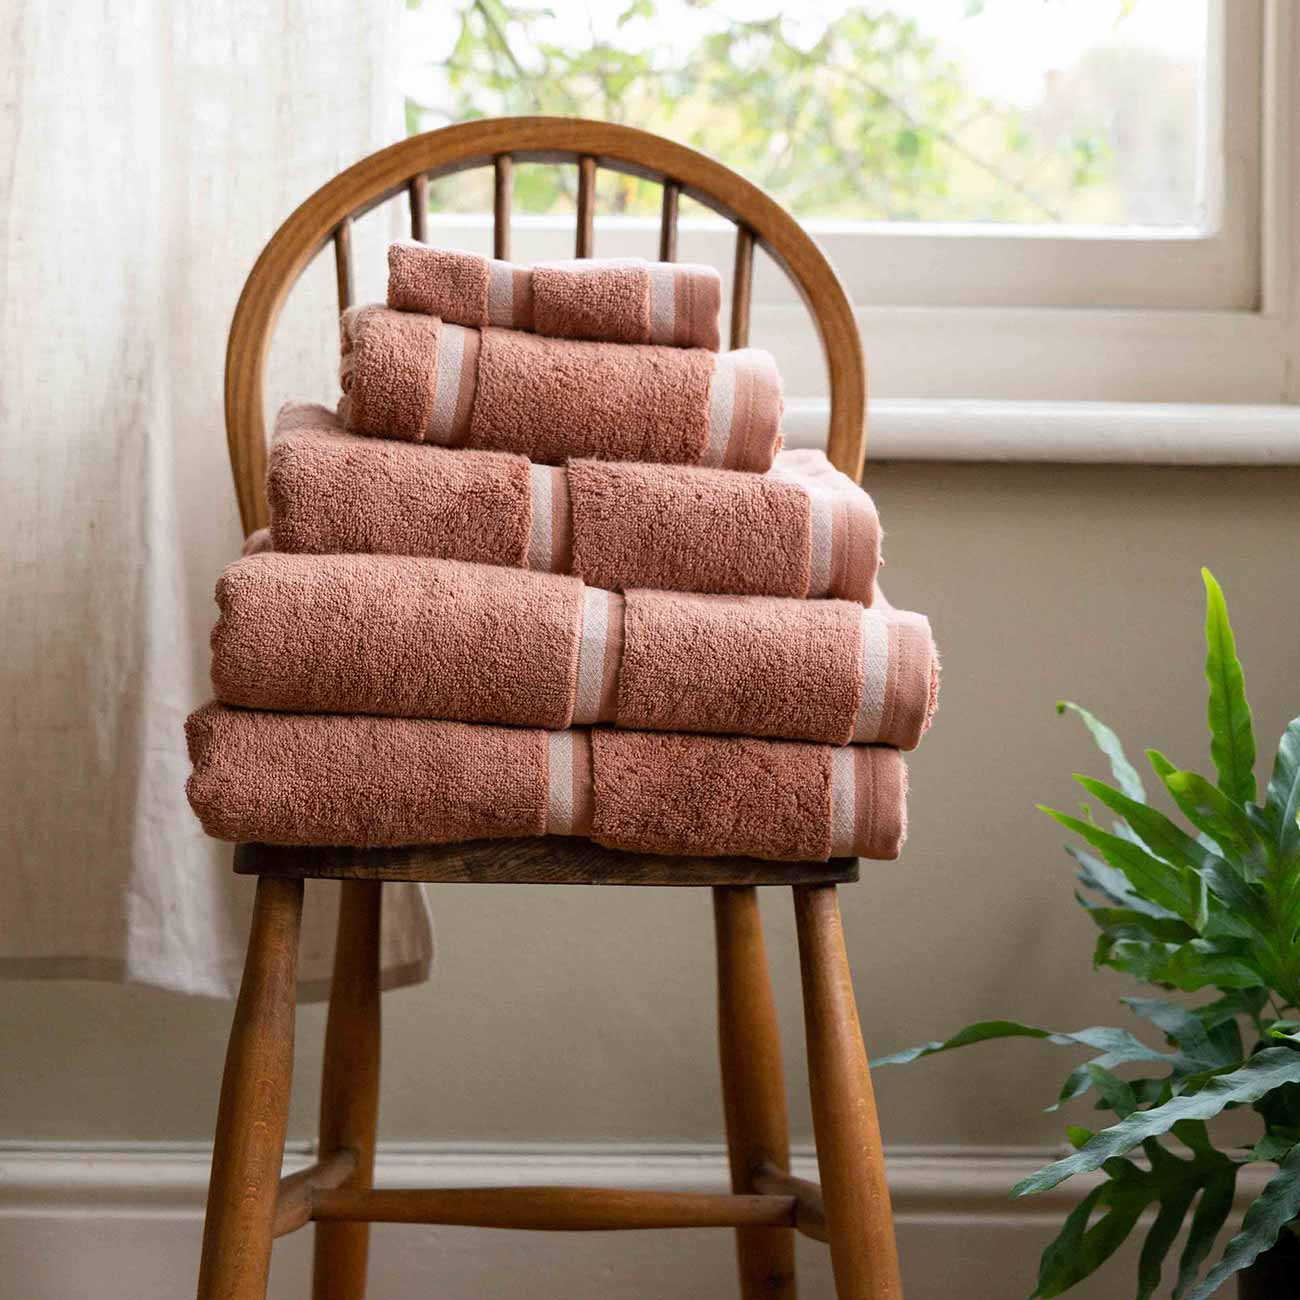 Warm Clay Cotton Towels